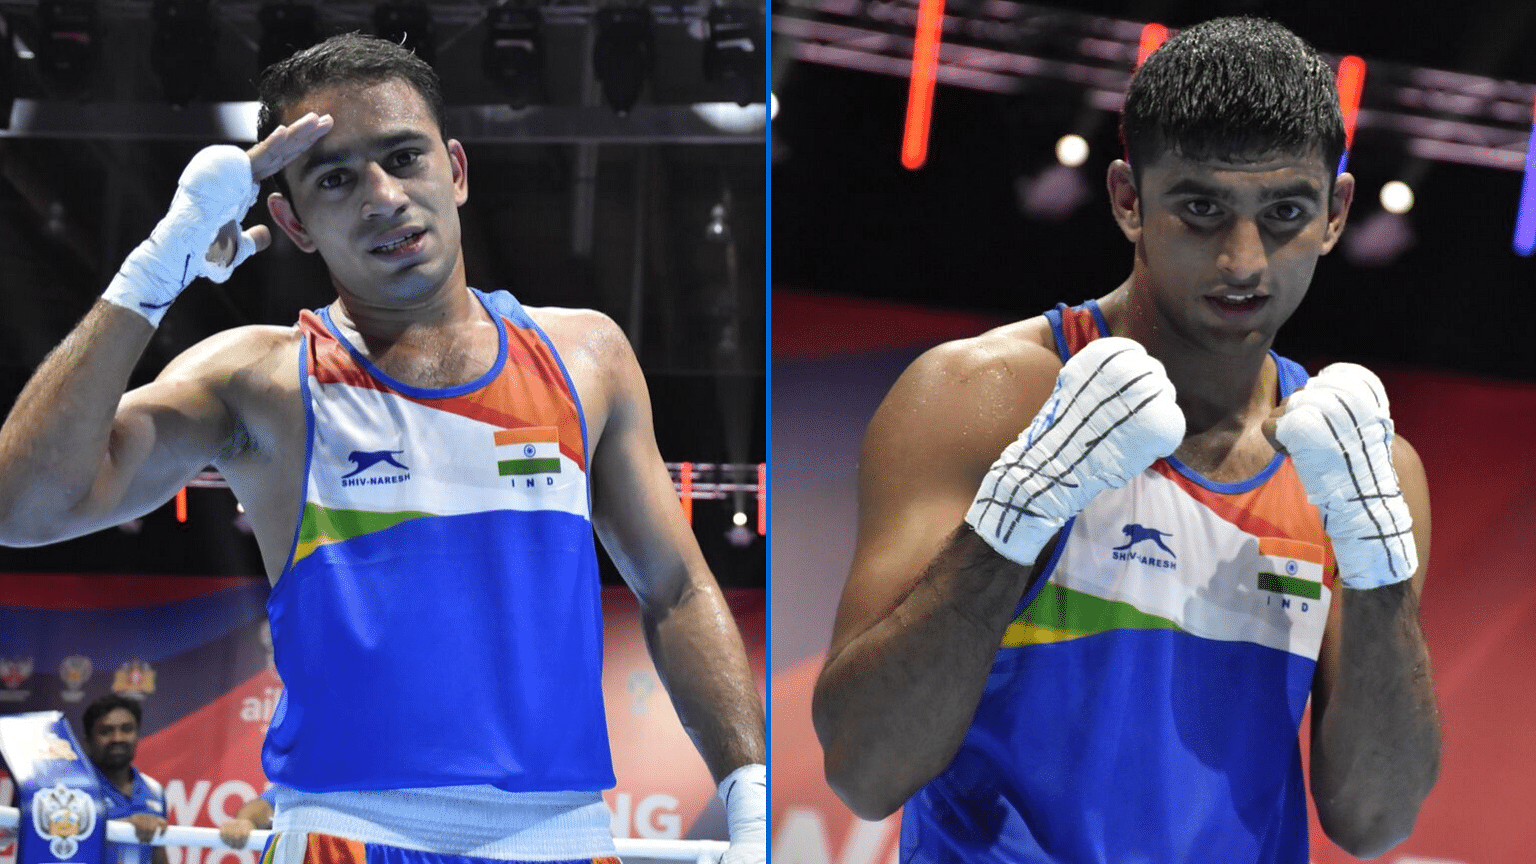 Amit Panghal (left) and Manish Kaushik after winning their quarterfinal bouts on Wednesday, 18 September.